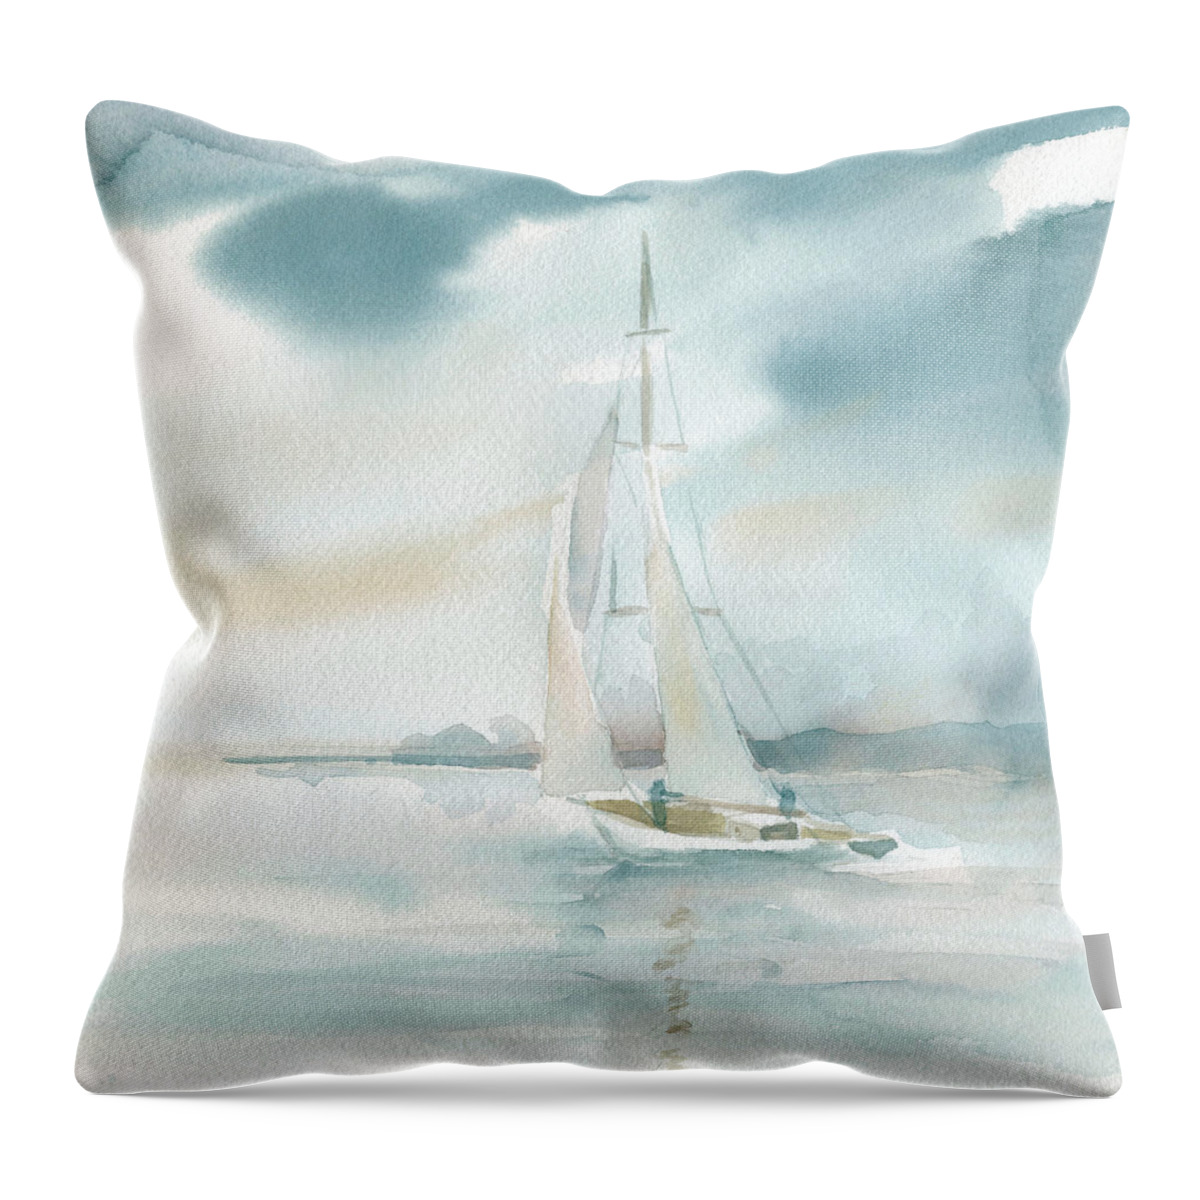 Ocean Sea Sailboat Watercolor Teal Coastal Seascape Throw Pillow featuring the painting Subtle Mist 1 by Carol Robinson